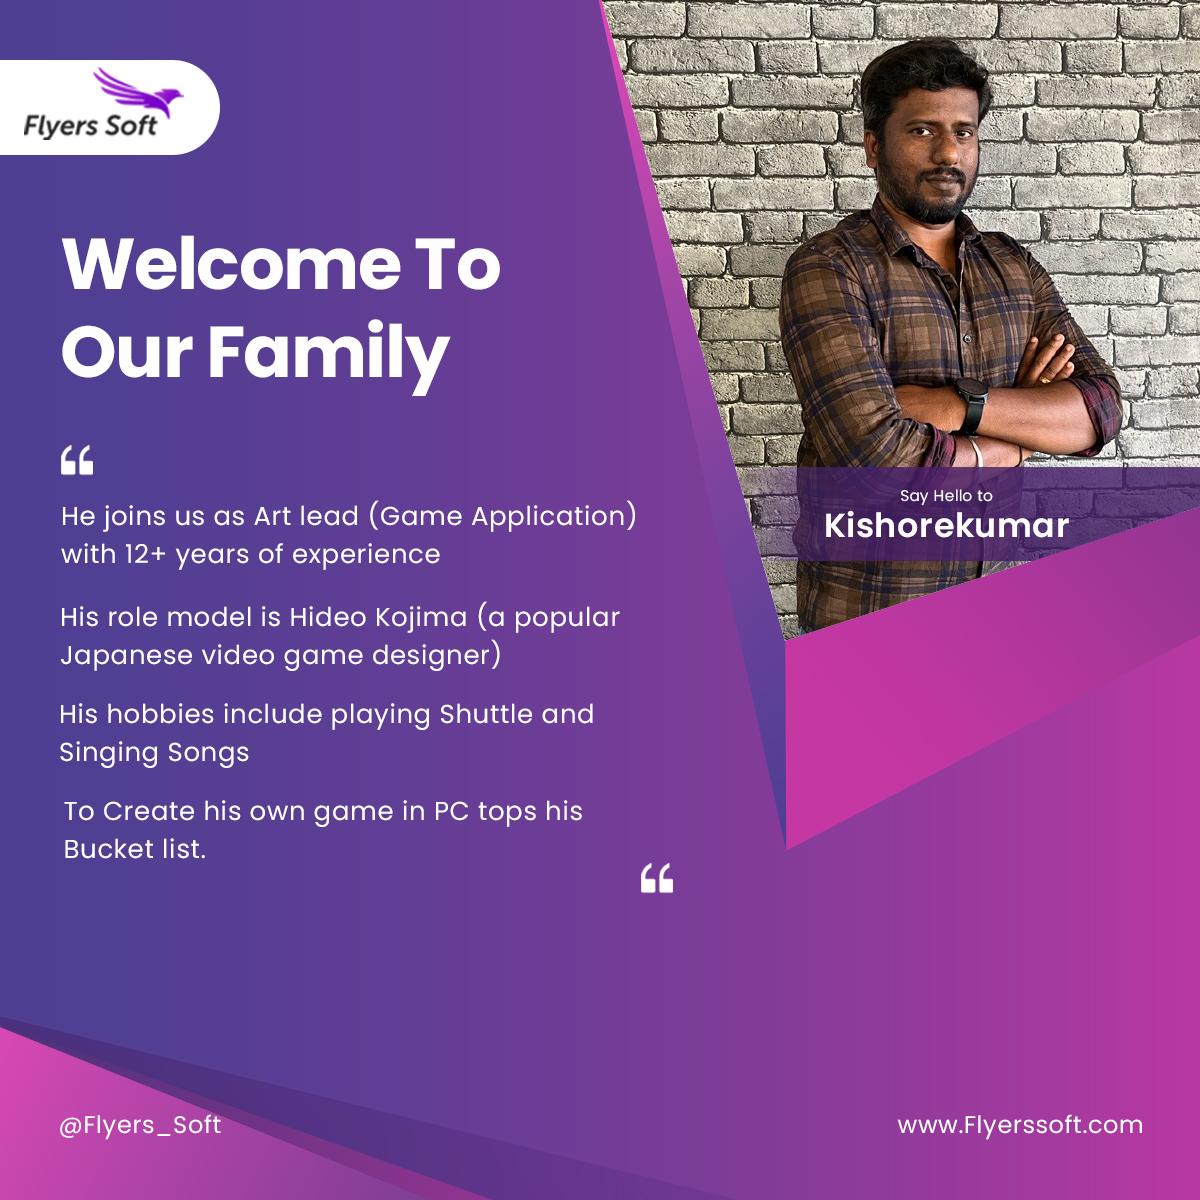 @FlyersSoft would like to welcome our new team member 'kishore' who has joined us recently.

We are excited to have you with us and we look forward to sharing many successes. Welcome on board!
.
.
.
#flyerssoft #newjoinee #newjourney #newjoiner #freshstart #Flyerssoftfamily